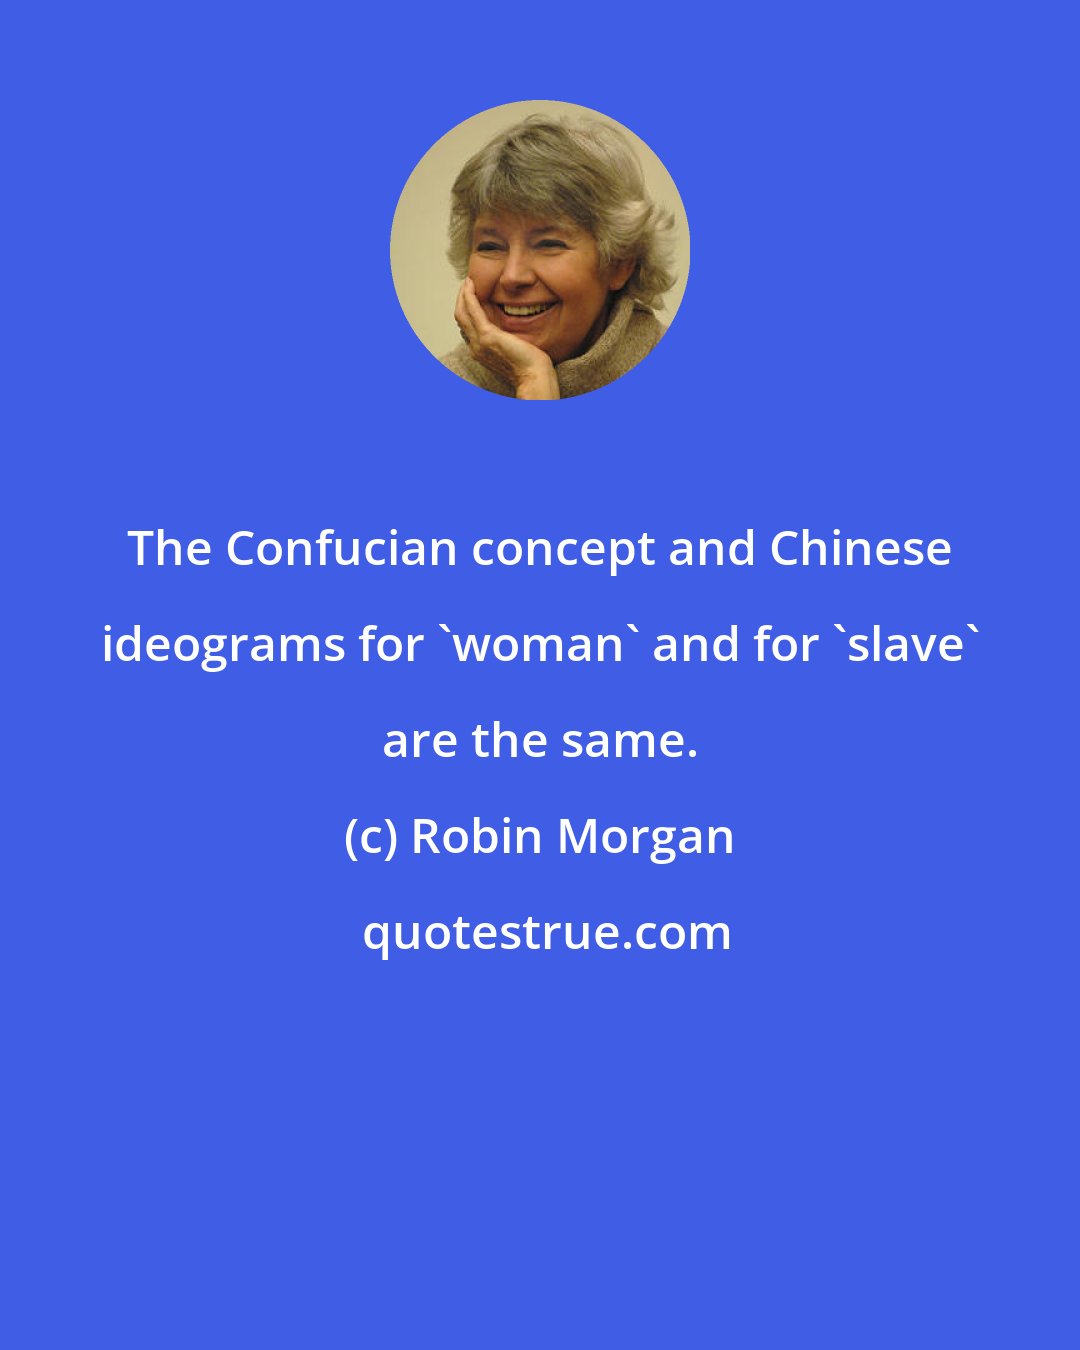 Robin Morgan: The Confucian concept and Chinese ideograms for 'woman' and for 'slave' are the same.